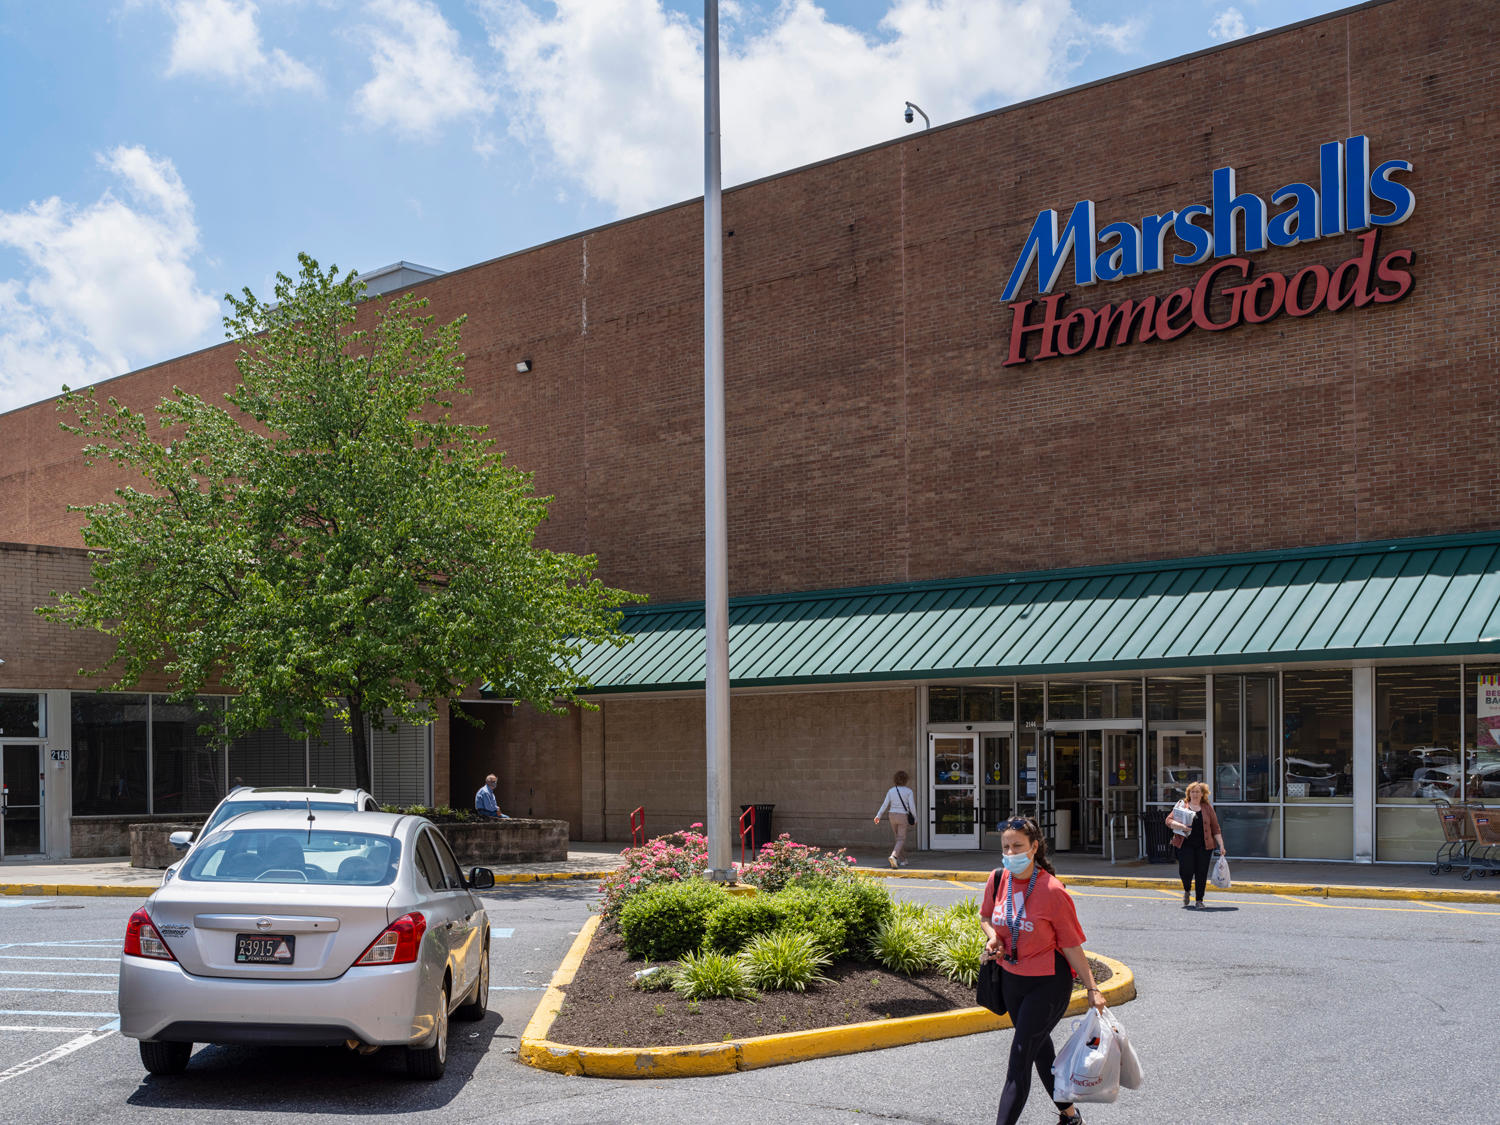 Marshalls and Home Goods at Lehigh Shopping Center